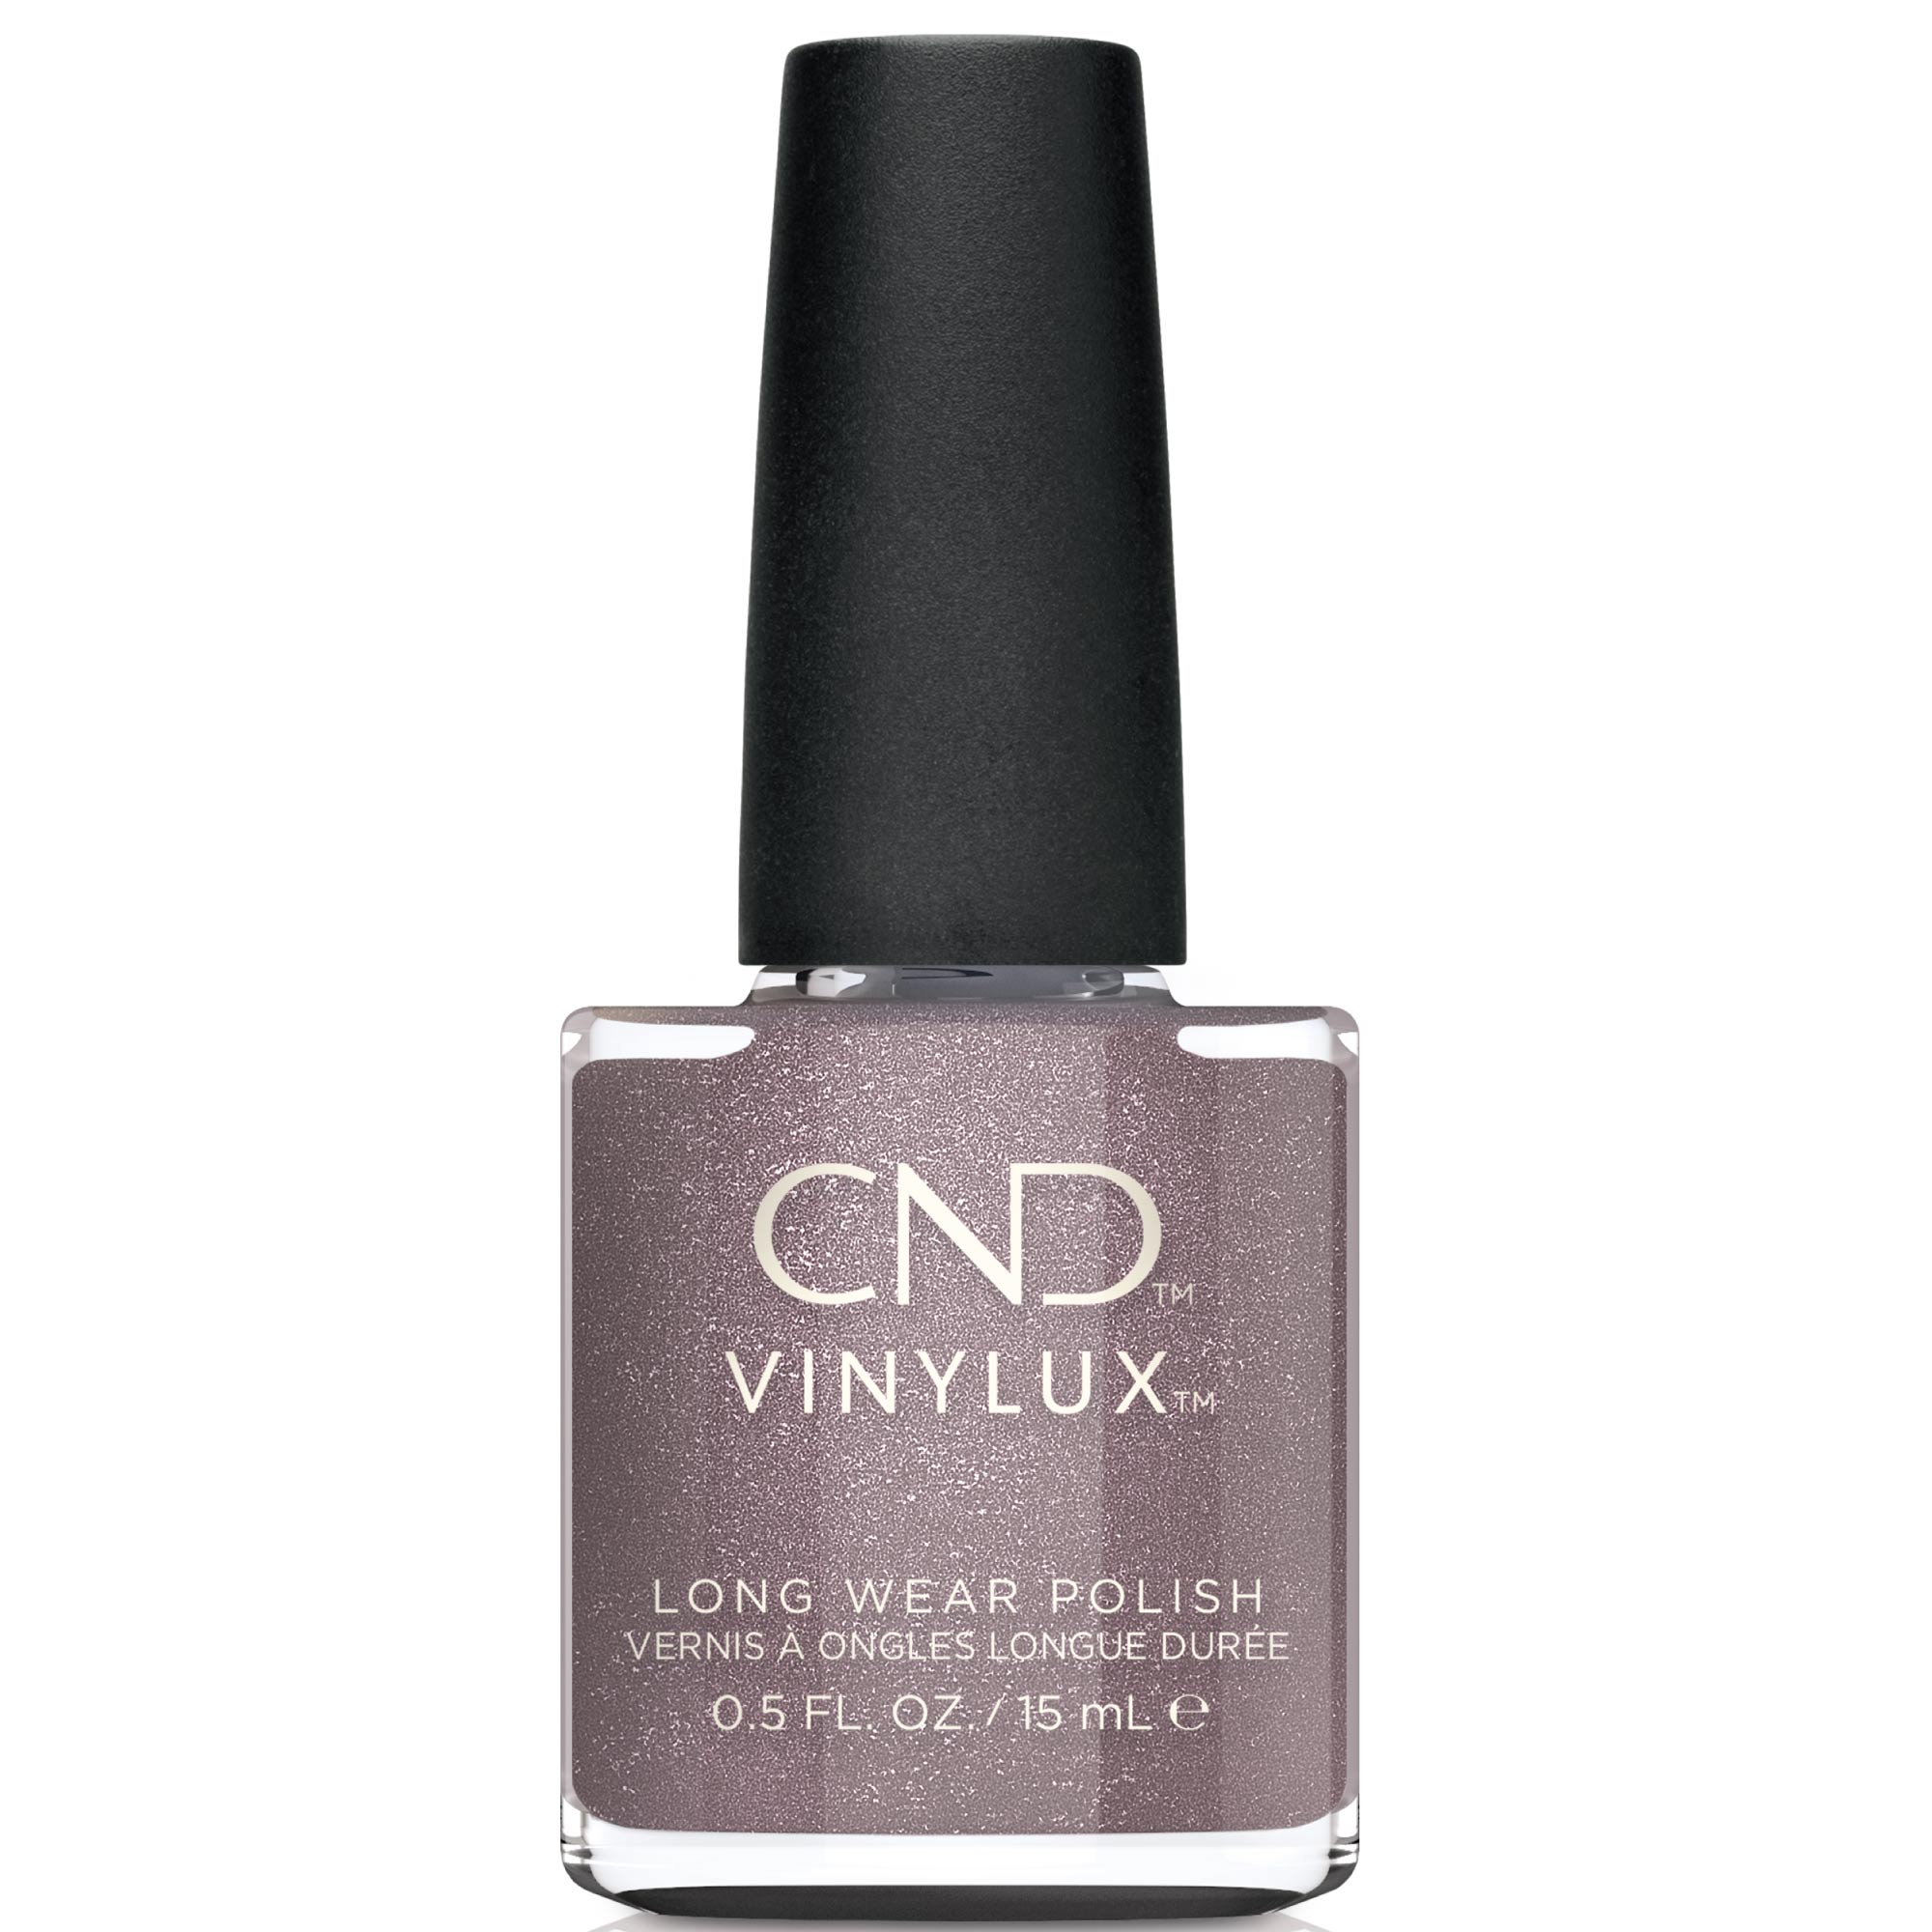 CND Statement Earrings #393 VINYLUX, 15 ml limited edition